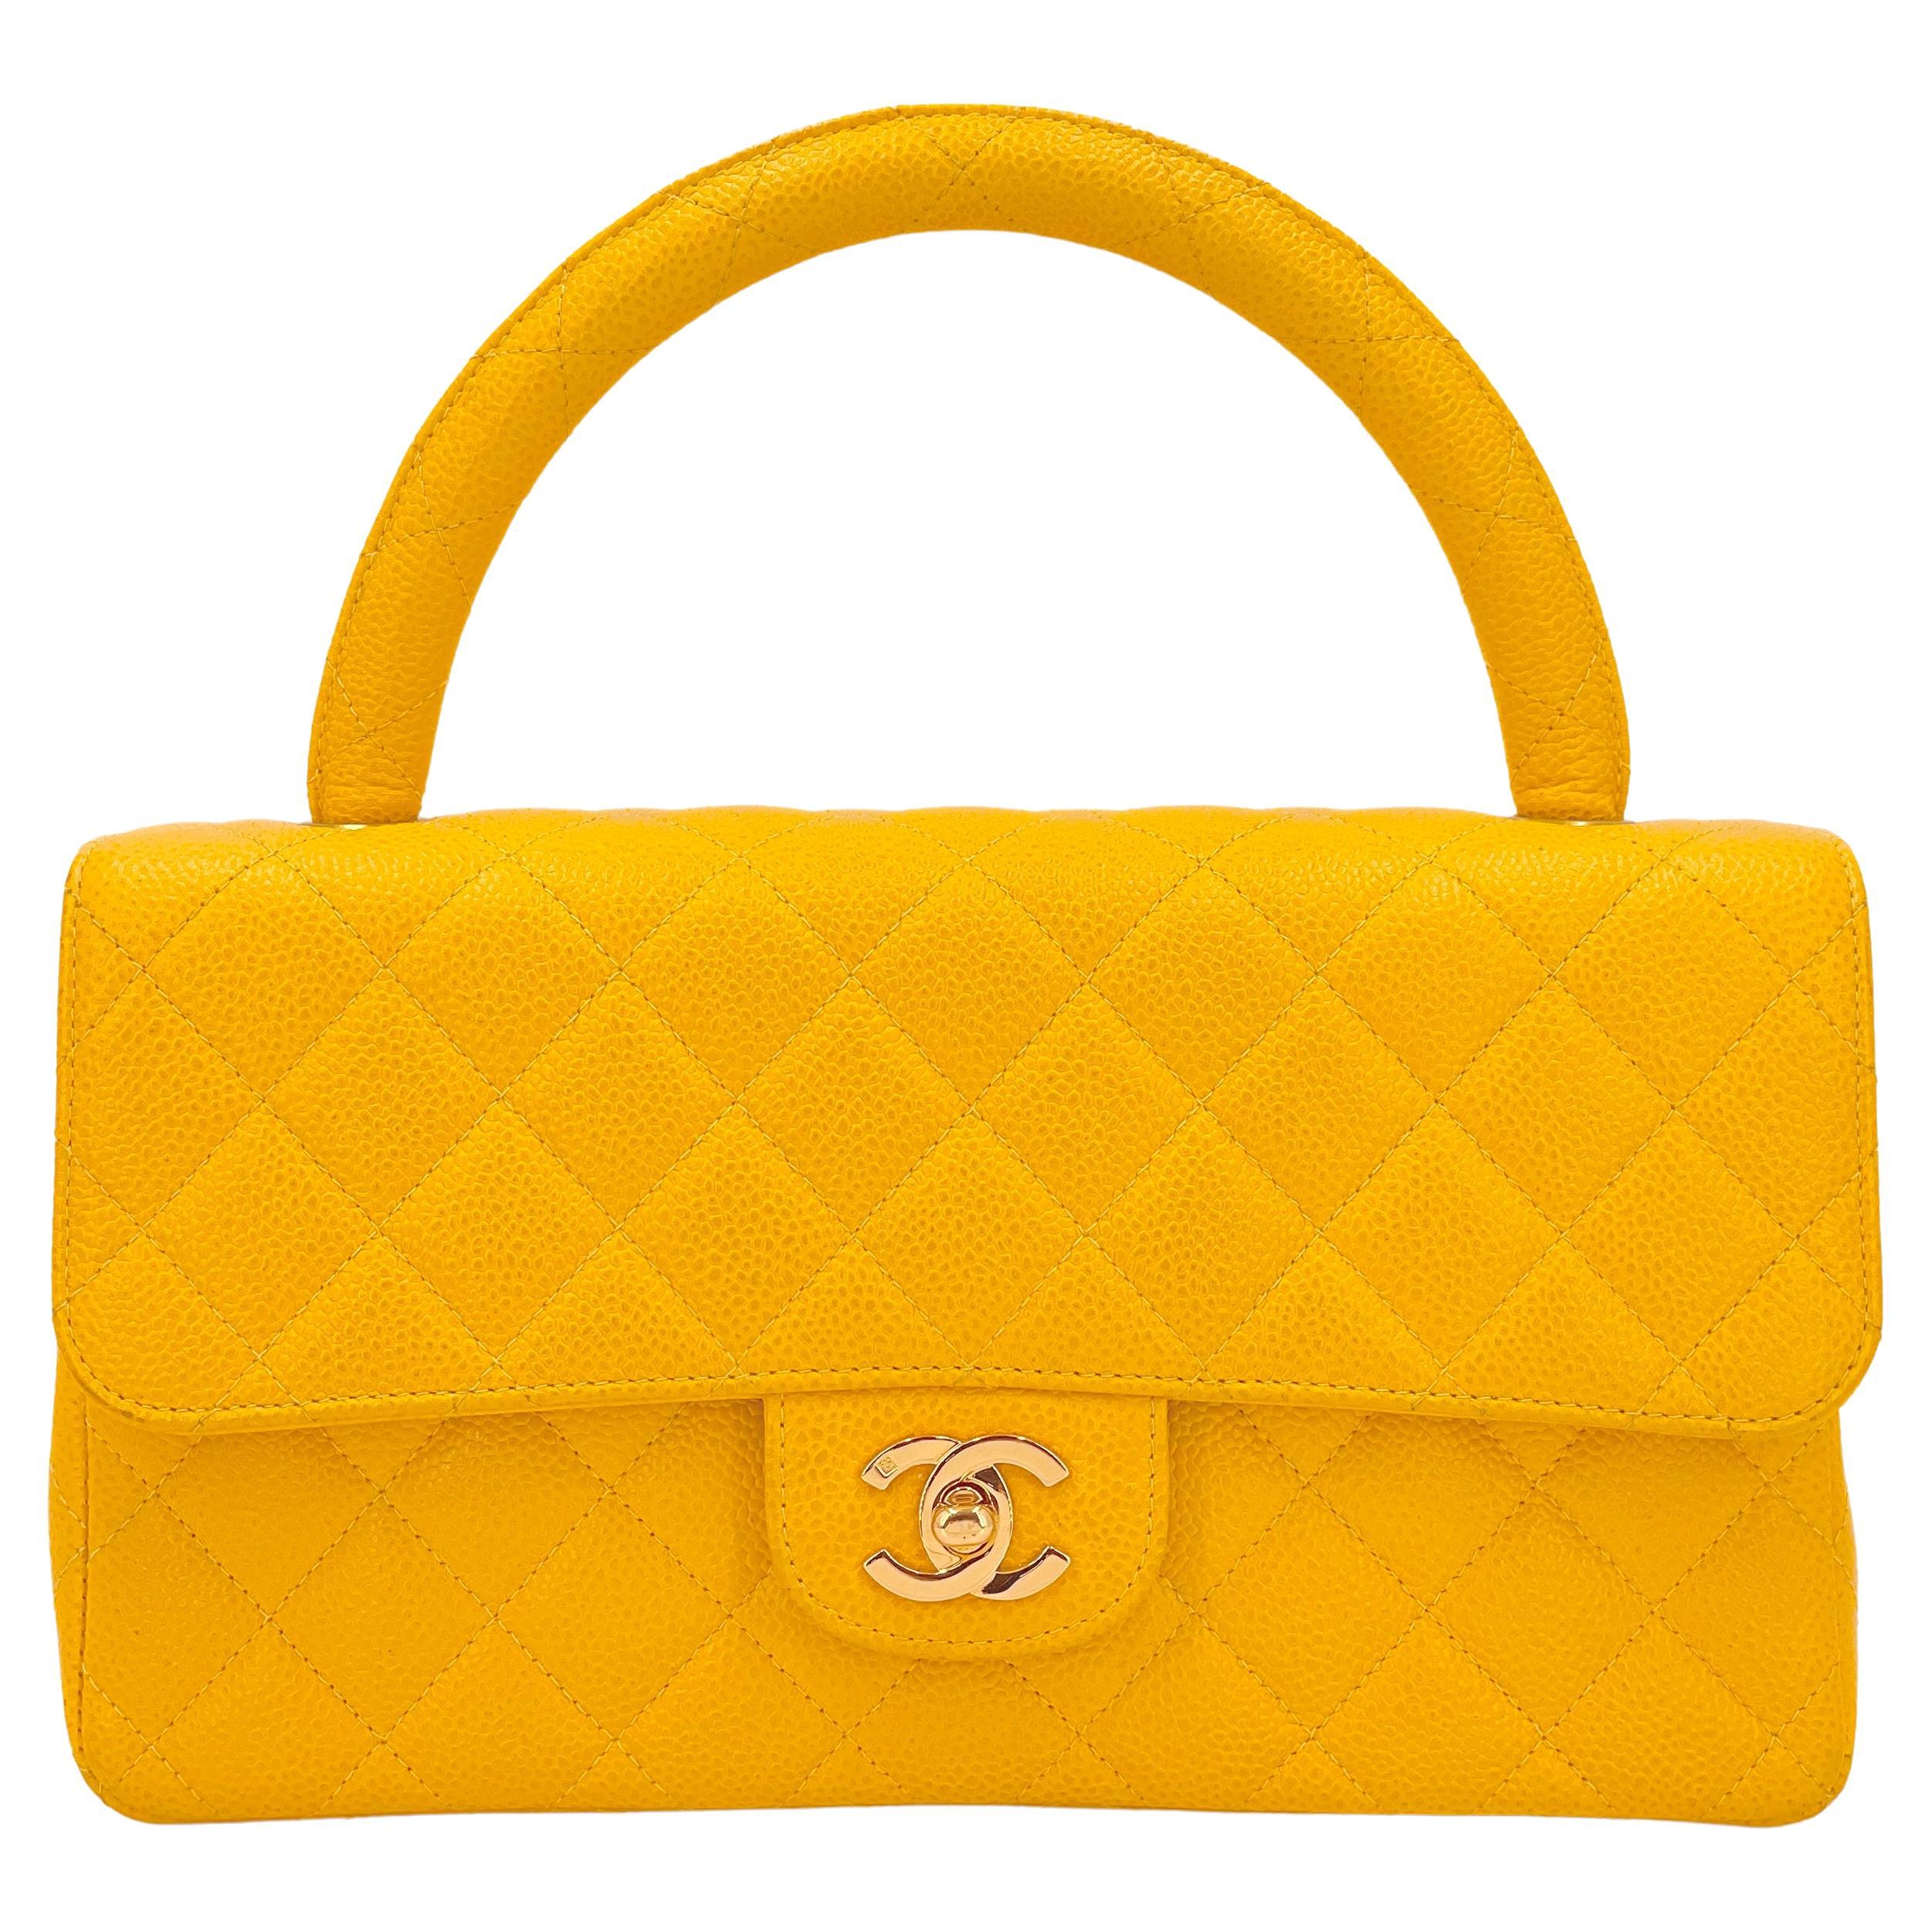 Chanel 1997 Vintage Canary Yellow Caviar Kelly Flap Parent Bag 24k GHW 66771 For Sale